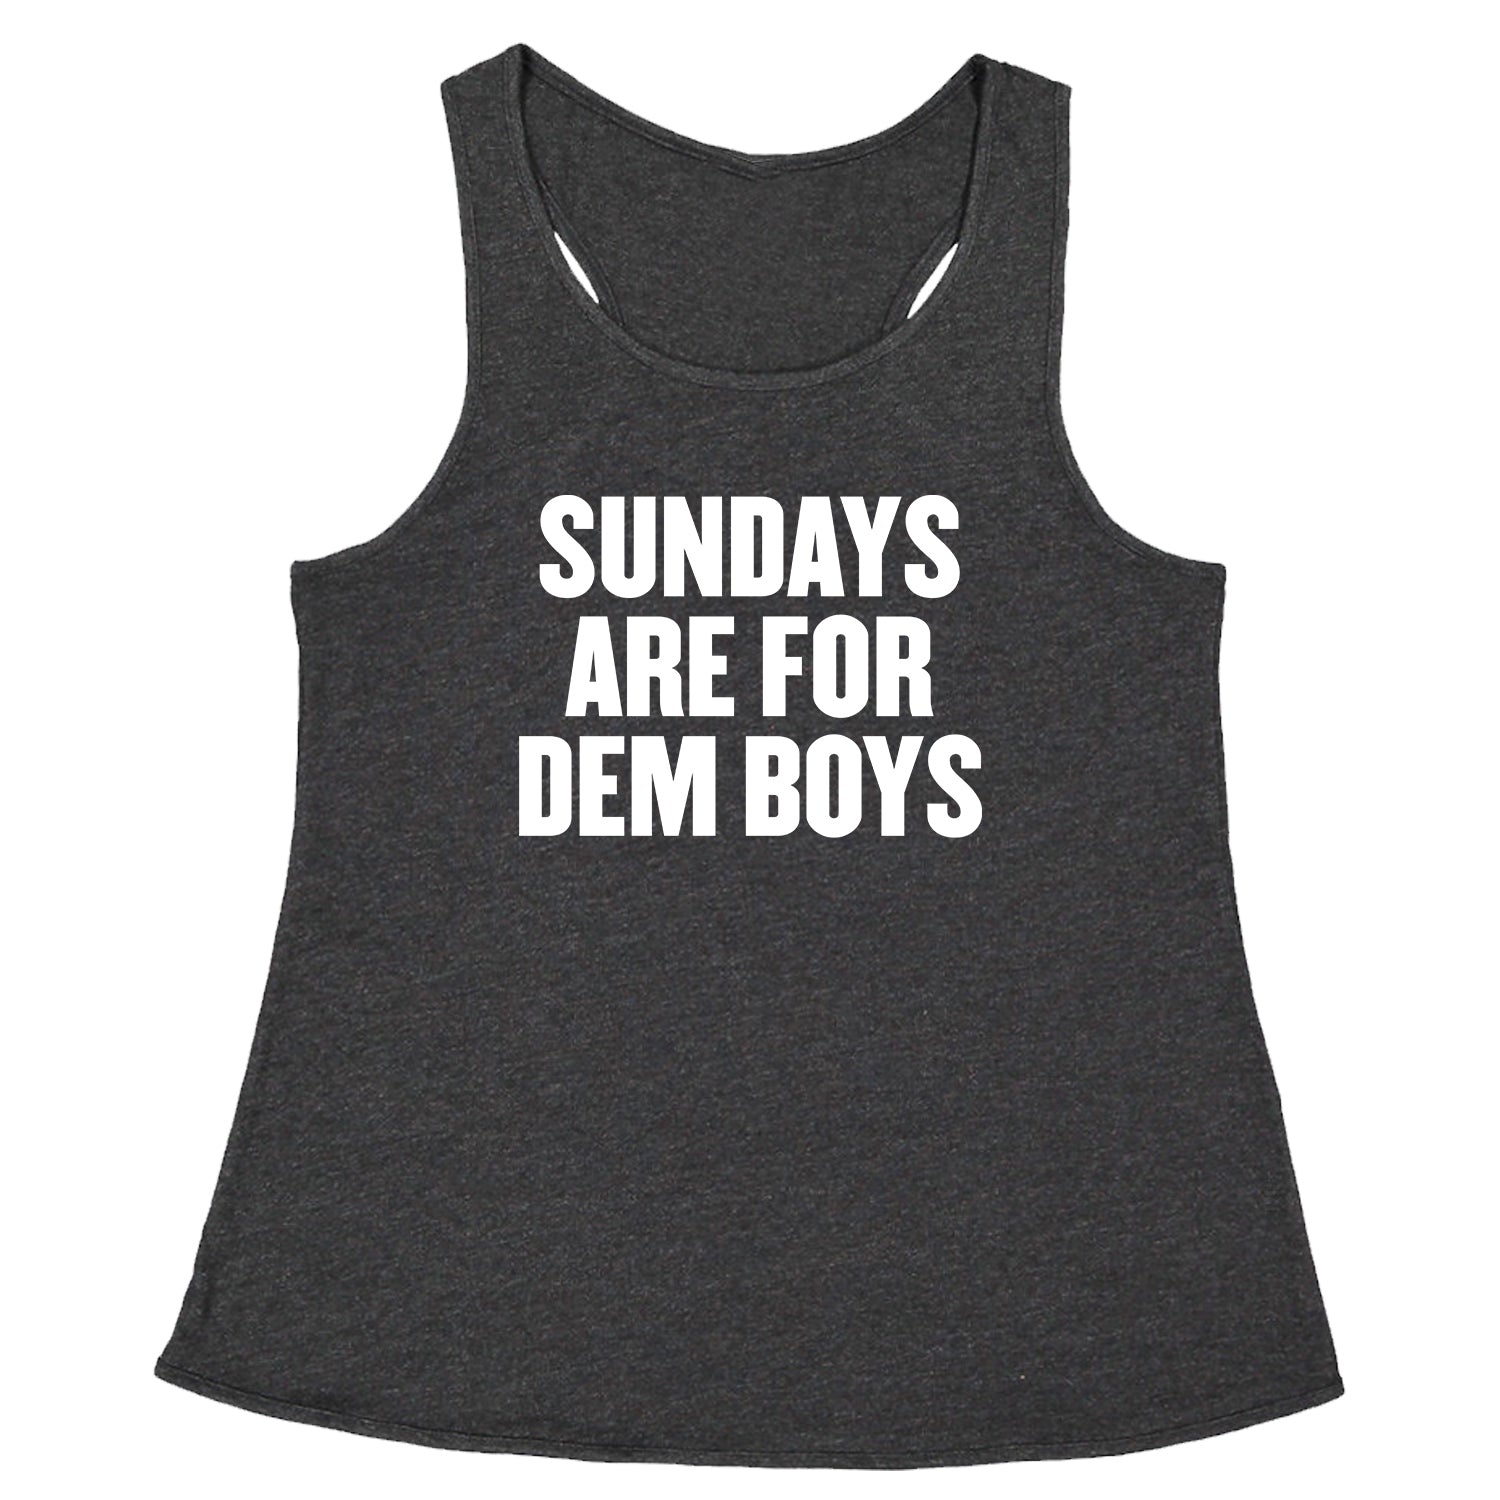 Sundays Are For Dem Boys Racerback Tank Top for Women dallas, fan, jersey, team, texas by Expression Tees